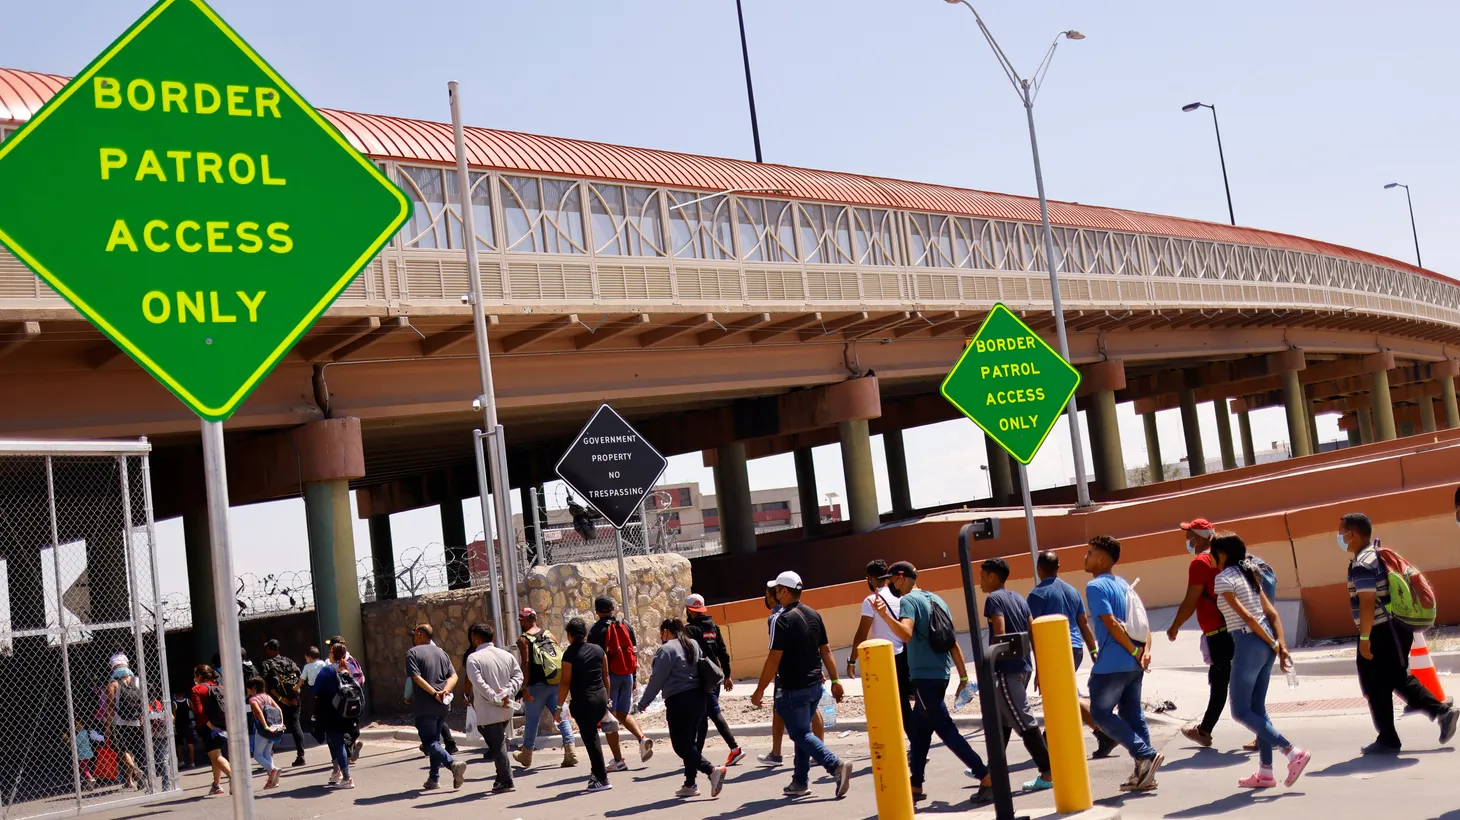 After crossing into the United States from Mexico, migrants turn themselves in to U.S. Border Patrol agents to request asylum in El Paso, Texas, U.S., September 12, 2022.